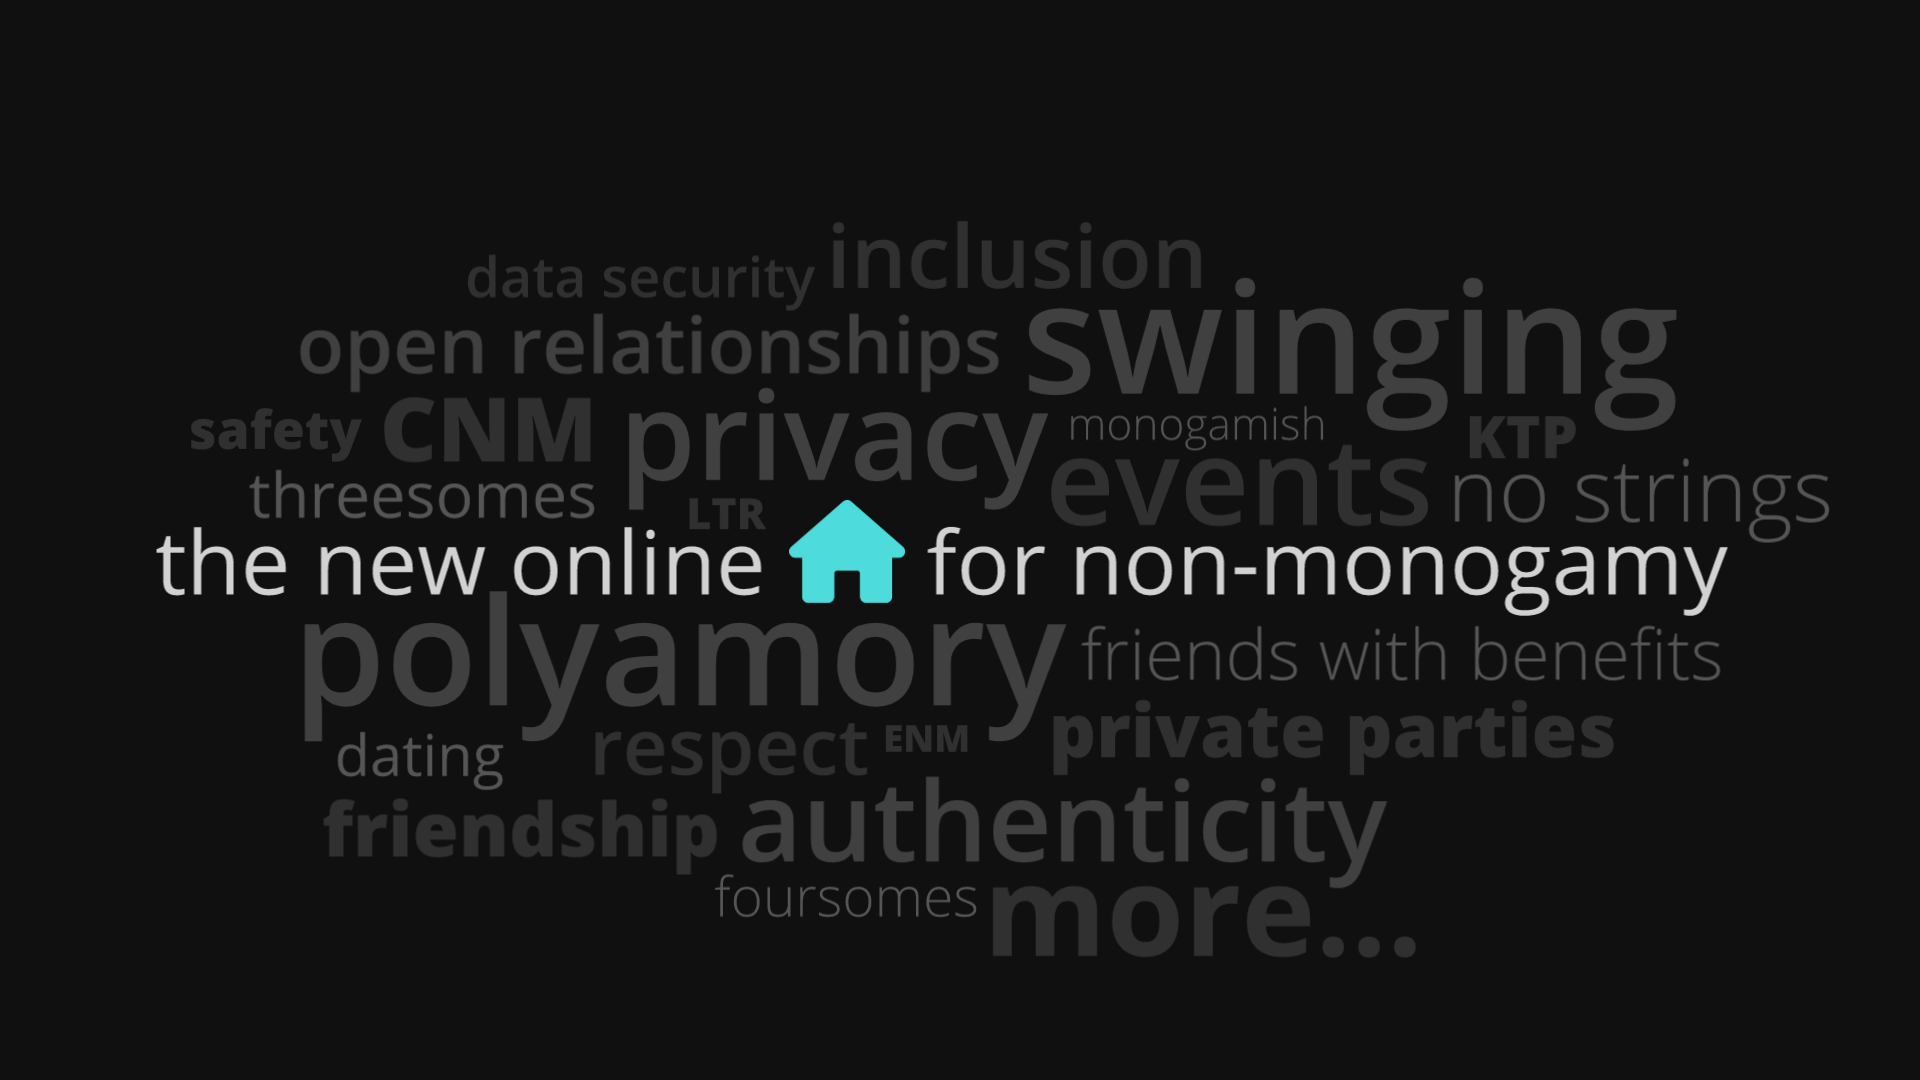 The new online home for non-monogamy. Polyamory, Swingers, Hotwife, BDSM, Open Relationships, Threesomes, Private Parties, Events, Kink, Friends With Benefits, No Strings Attached, Triads, Unicorn, LGBTQ+, Exhibitionism, Voyeurism, Dungeons, ENM Relationships and much more.